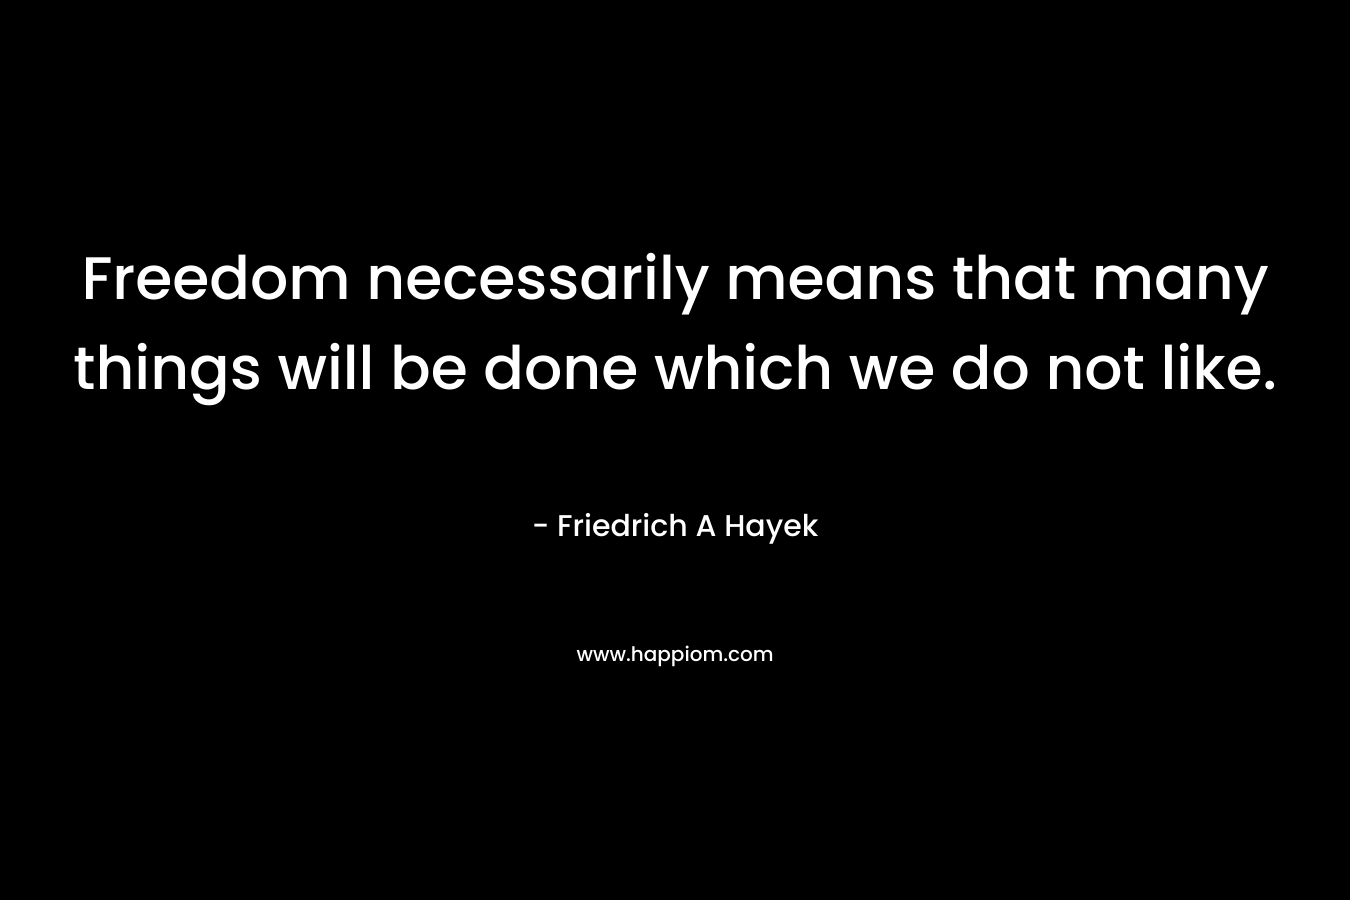 Freedom necessarily means that many things will be done which we do not like. – Friedrich A Hayek